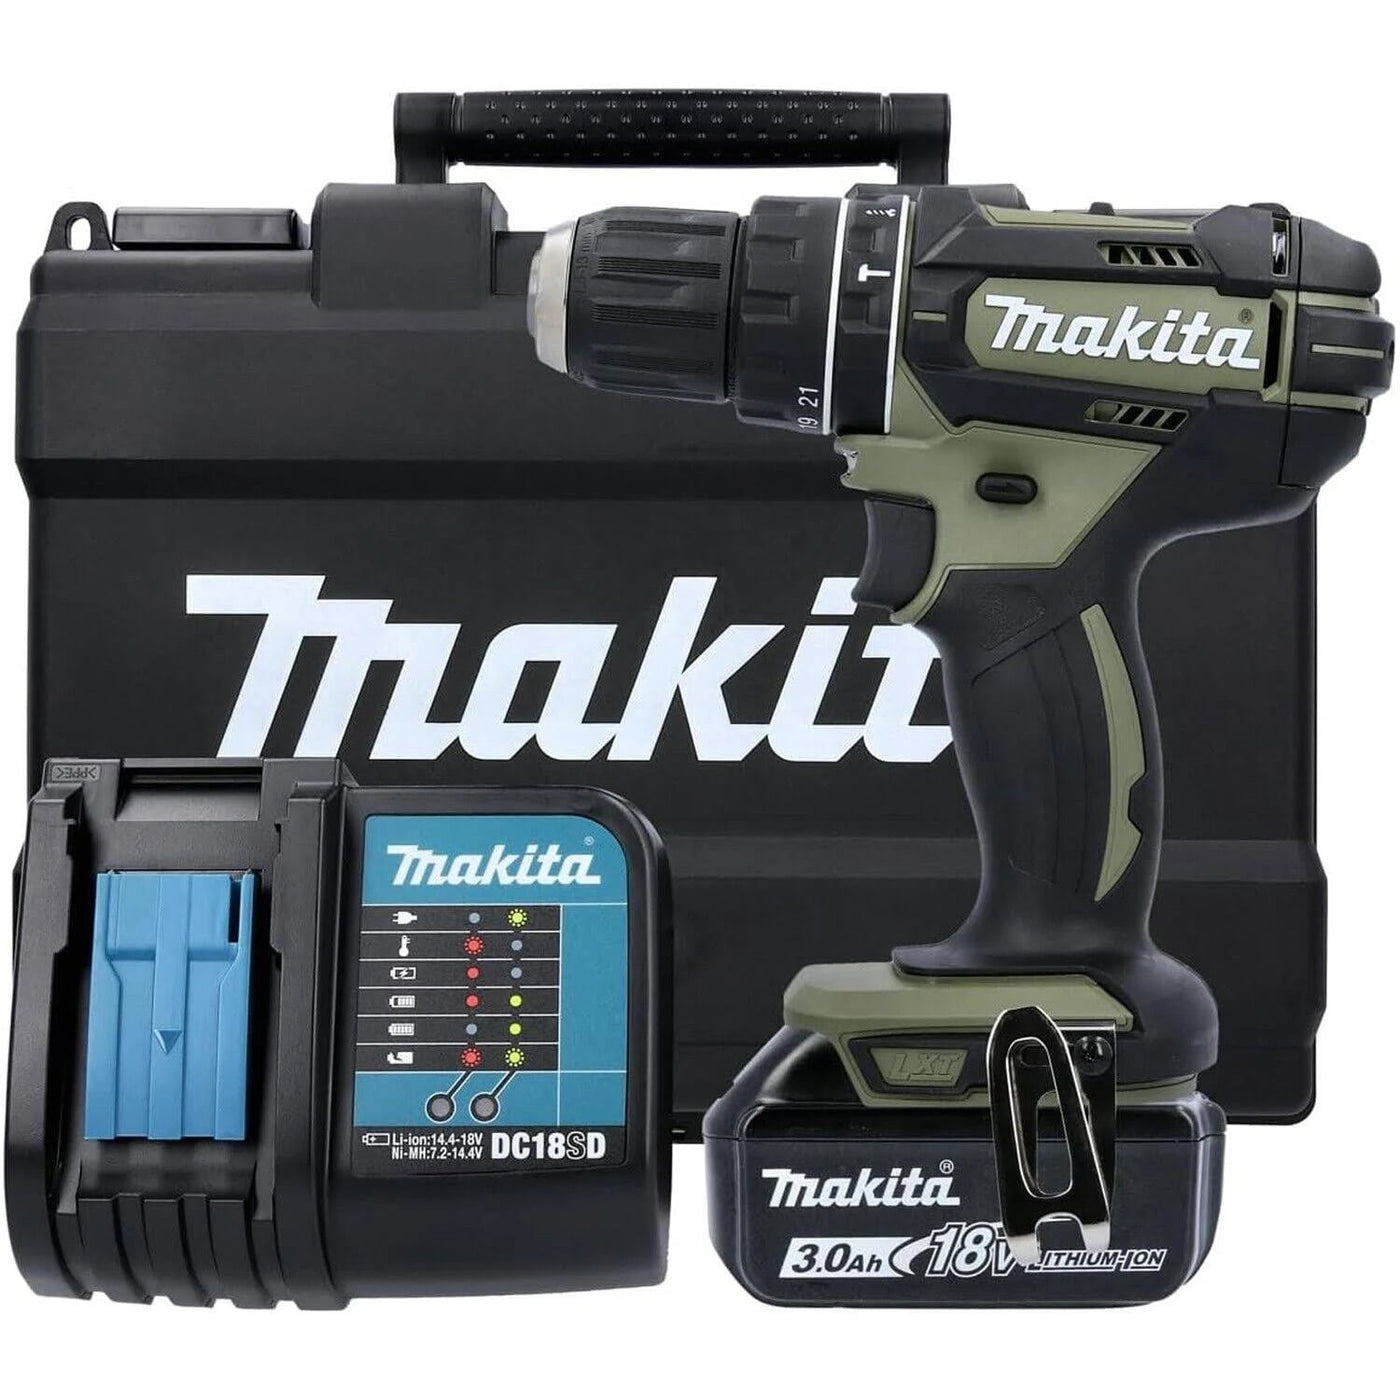 Makita DHP482SFO 18V LXT Combi Drill, 2 Speed, Olive Green, Includes 1X 3.0Ah Battery & Charger